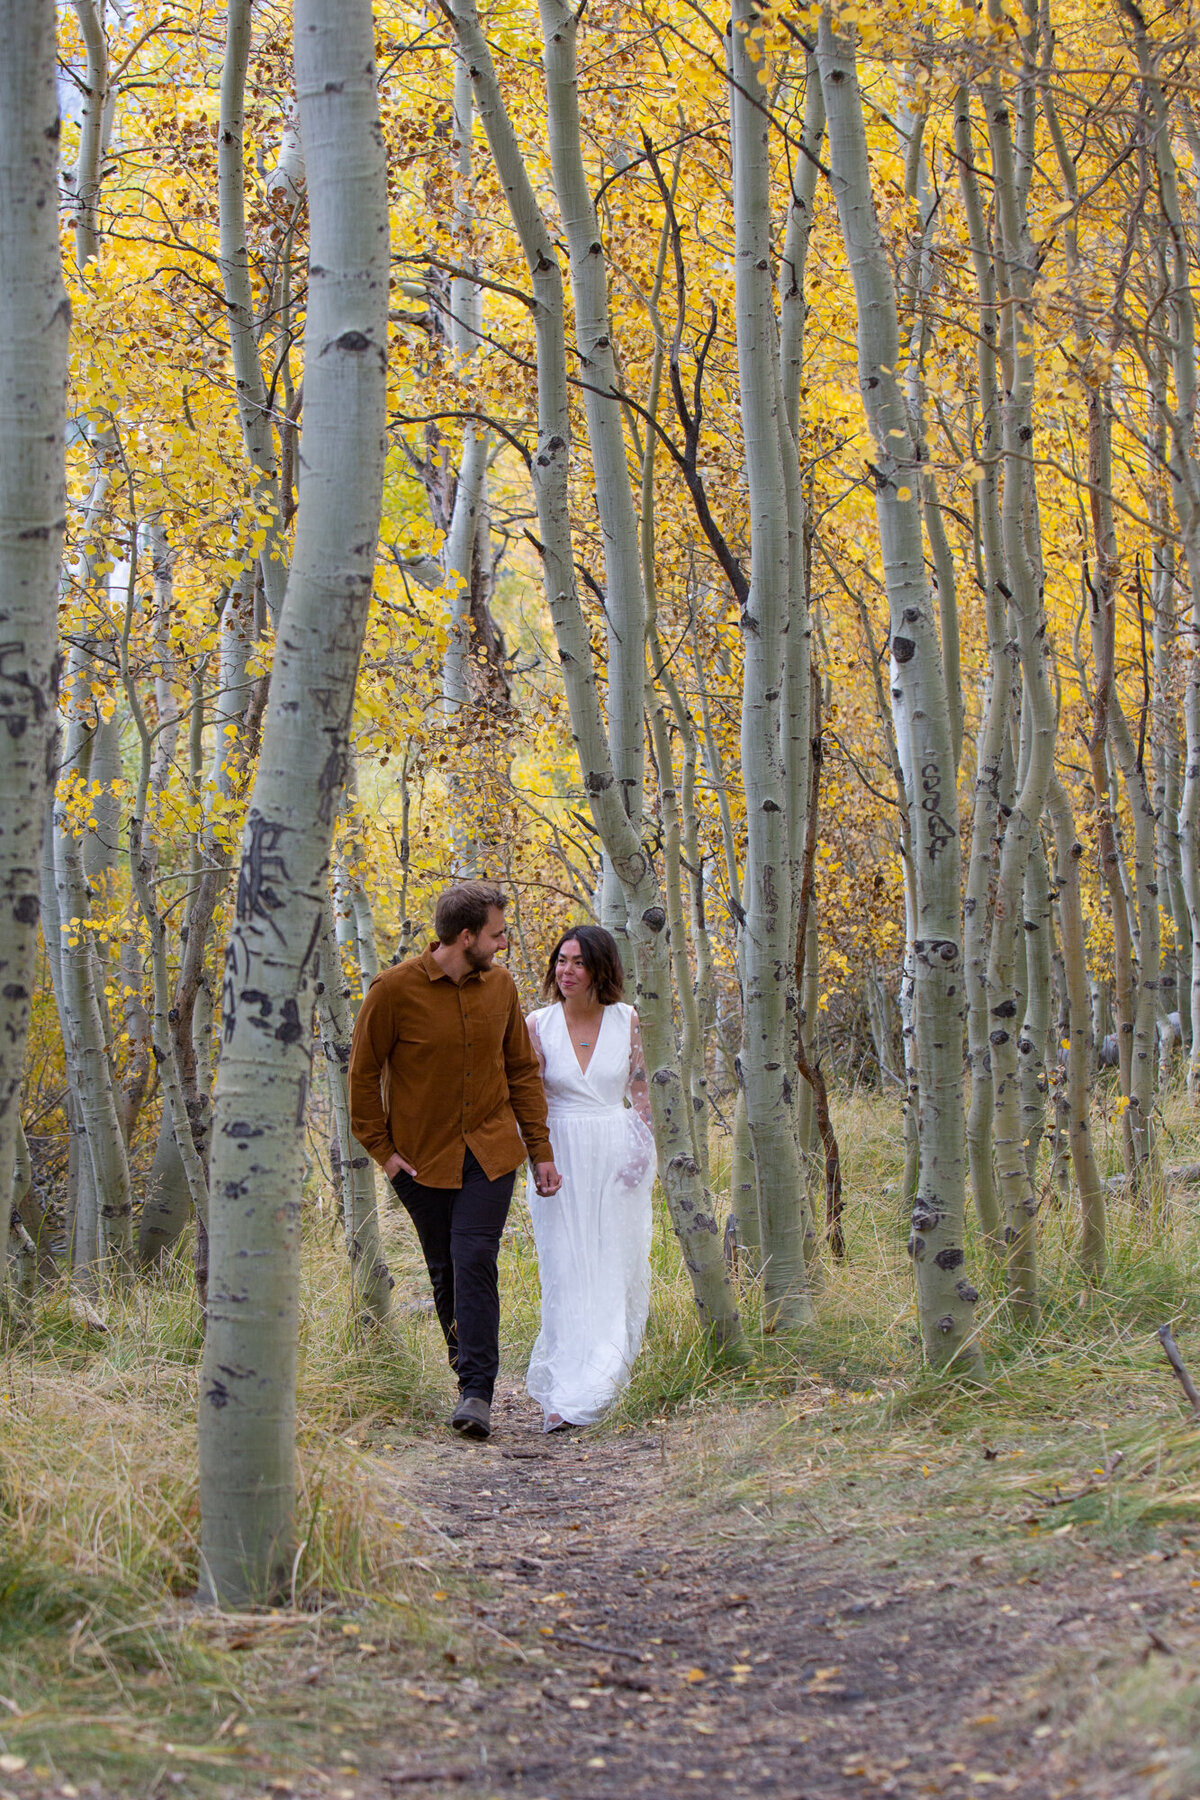 A bride and groom walk hand and hand through a grove of aspen trees in California.